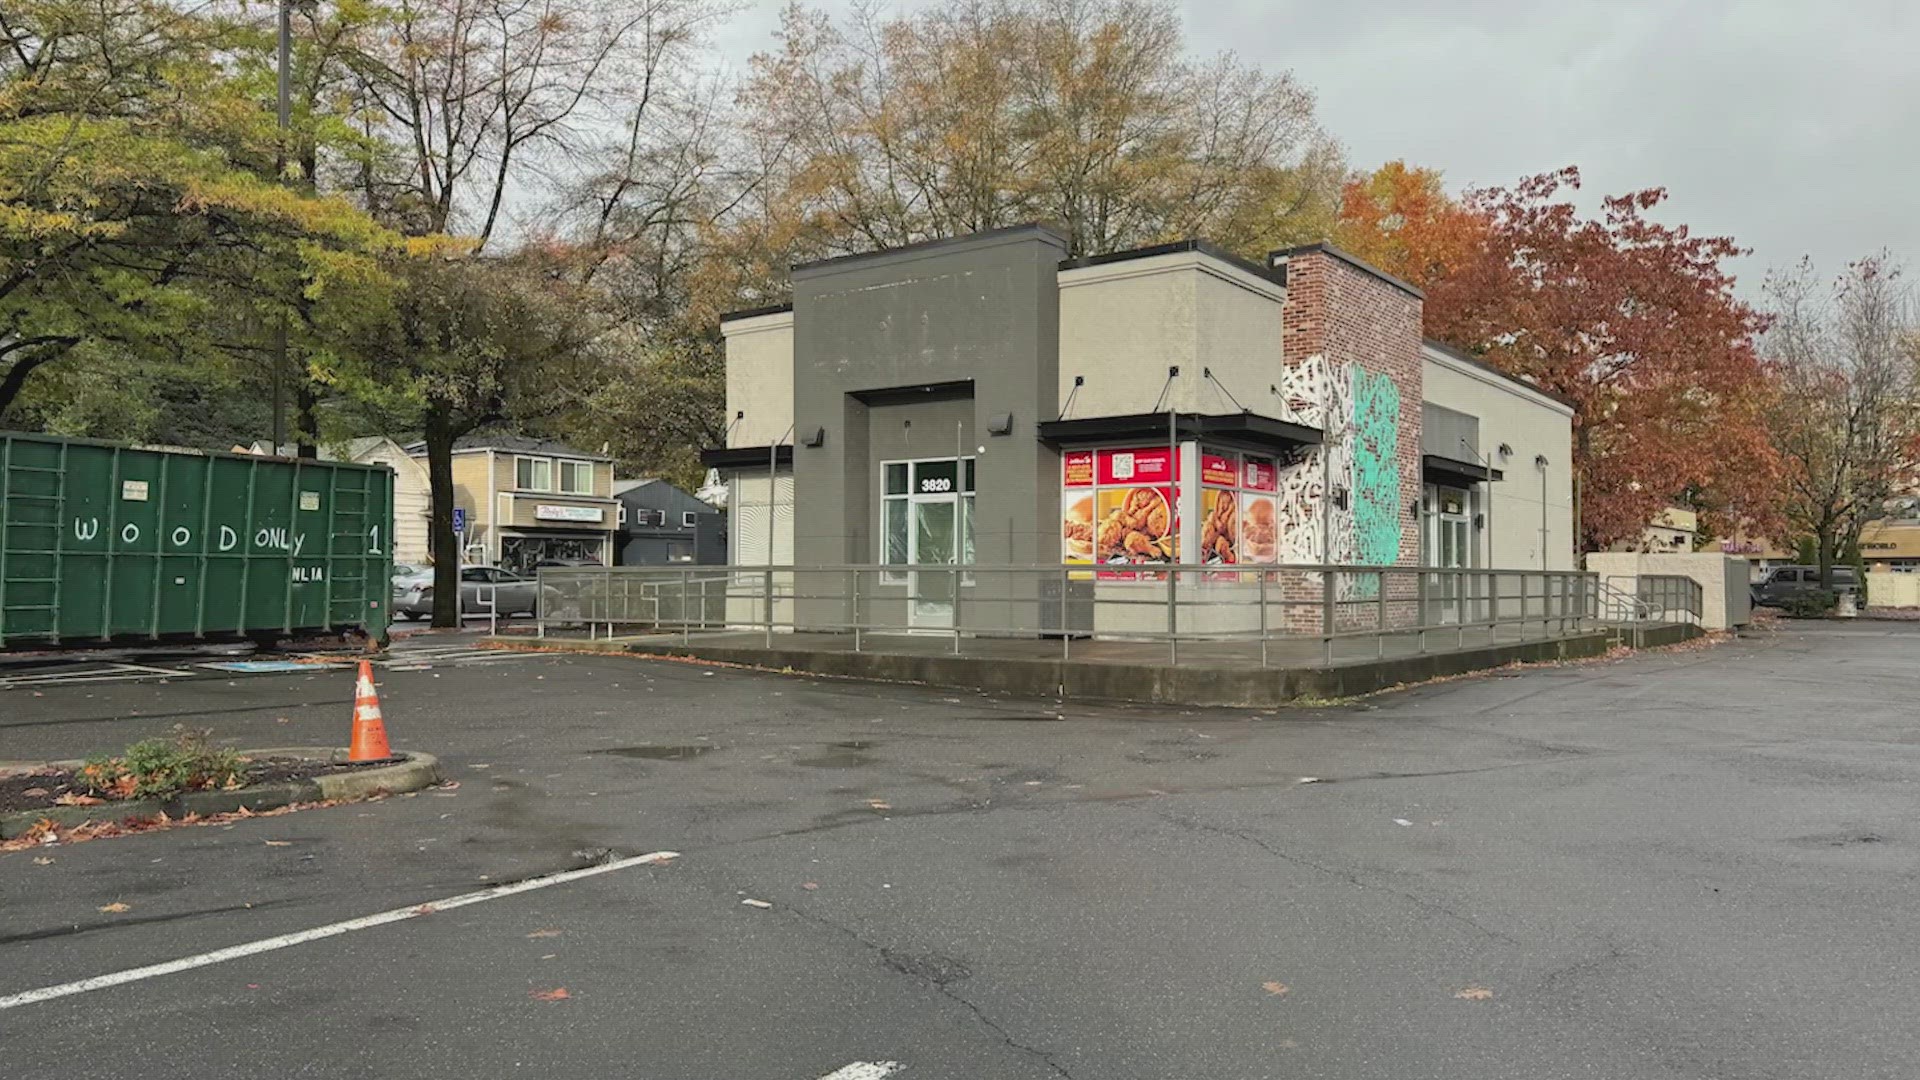 Jollibee's first Seattle location will be in Rainier Valley Square at 3820 Rainier Avenue South, according to the developer's website.